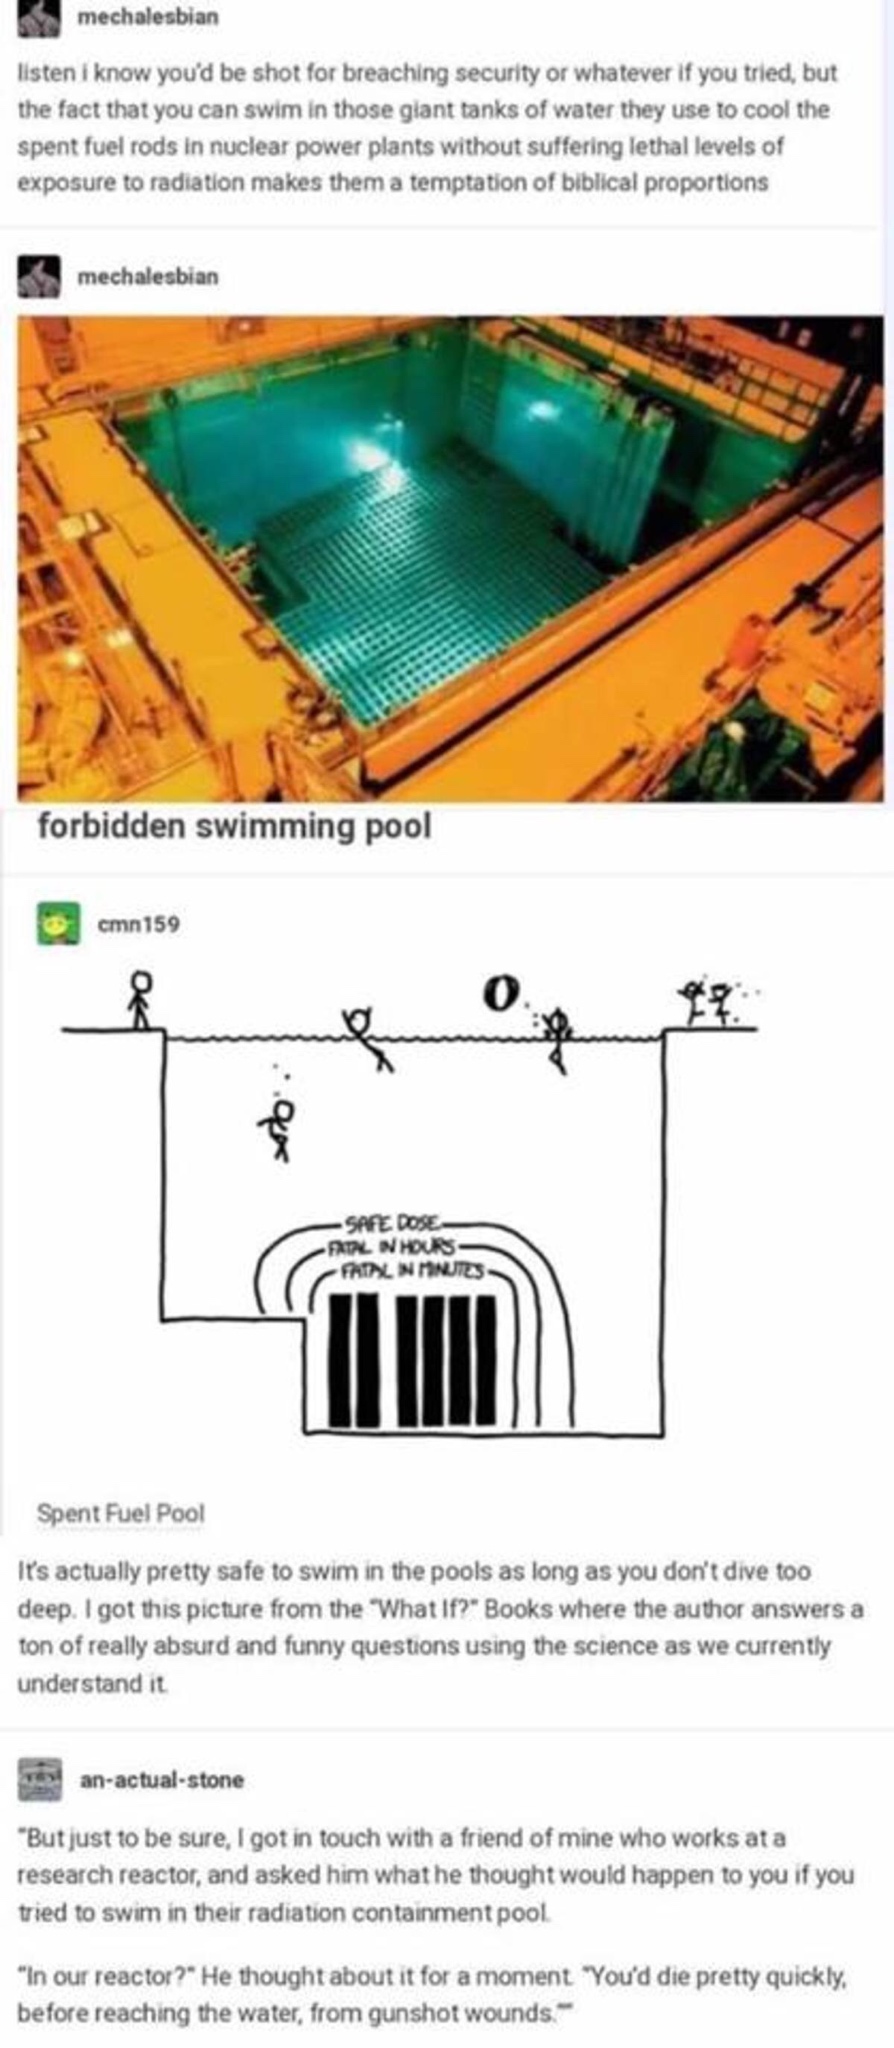 spent fuel pool - mechalesbian listen i know you'd be shot for breaching security or whatever if you tried, but the fact that you can swim in those giant tanks of water they use to cool the spent fuel rods in nuclear power plants without suffering lethal 